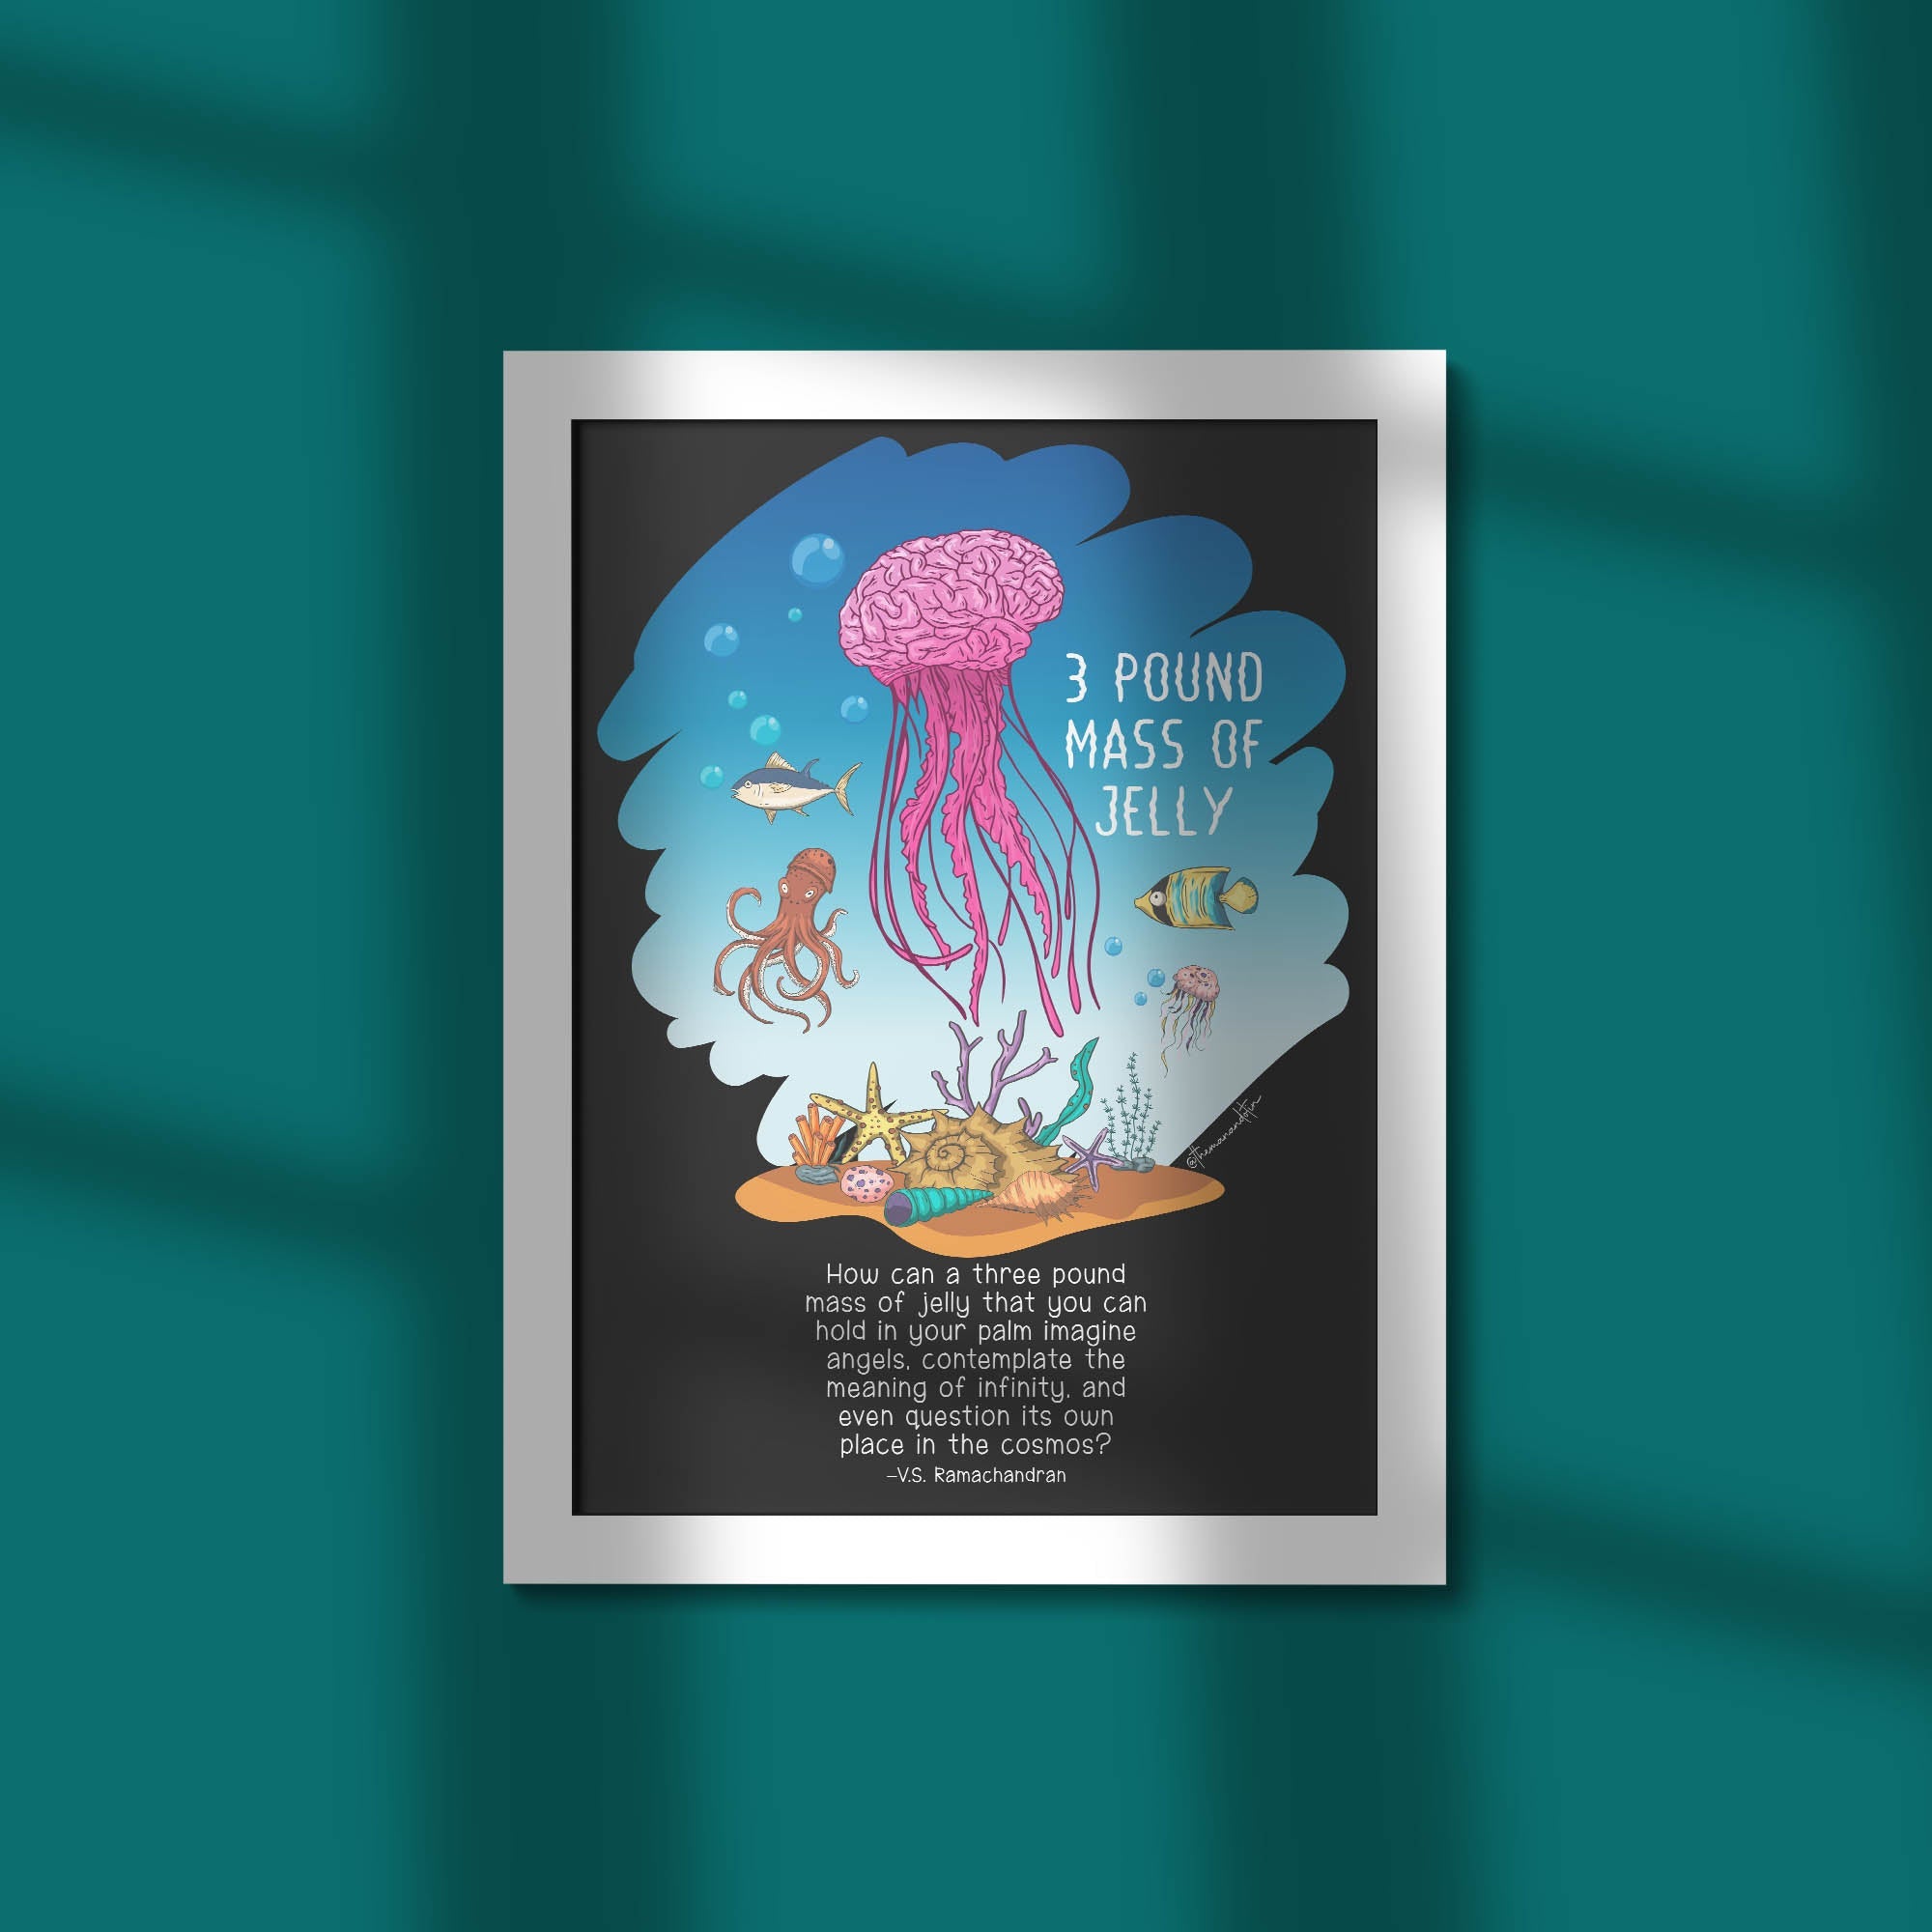 Three Pound Mass Of Jelly - Framed Poster For Clinics, Hospitals &amp; Study Spaces